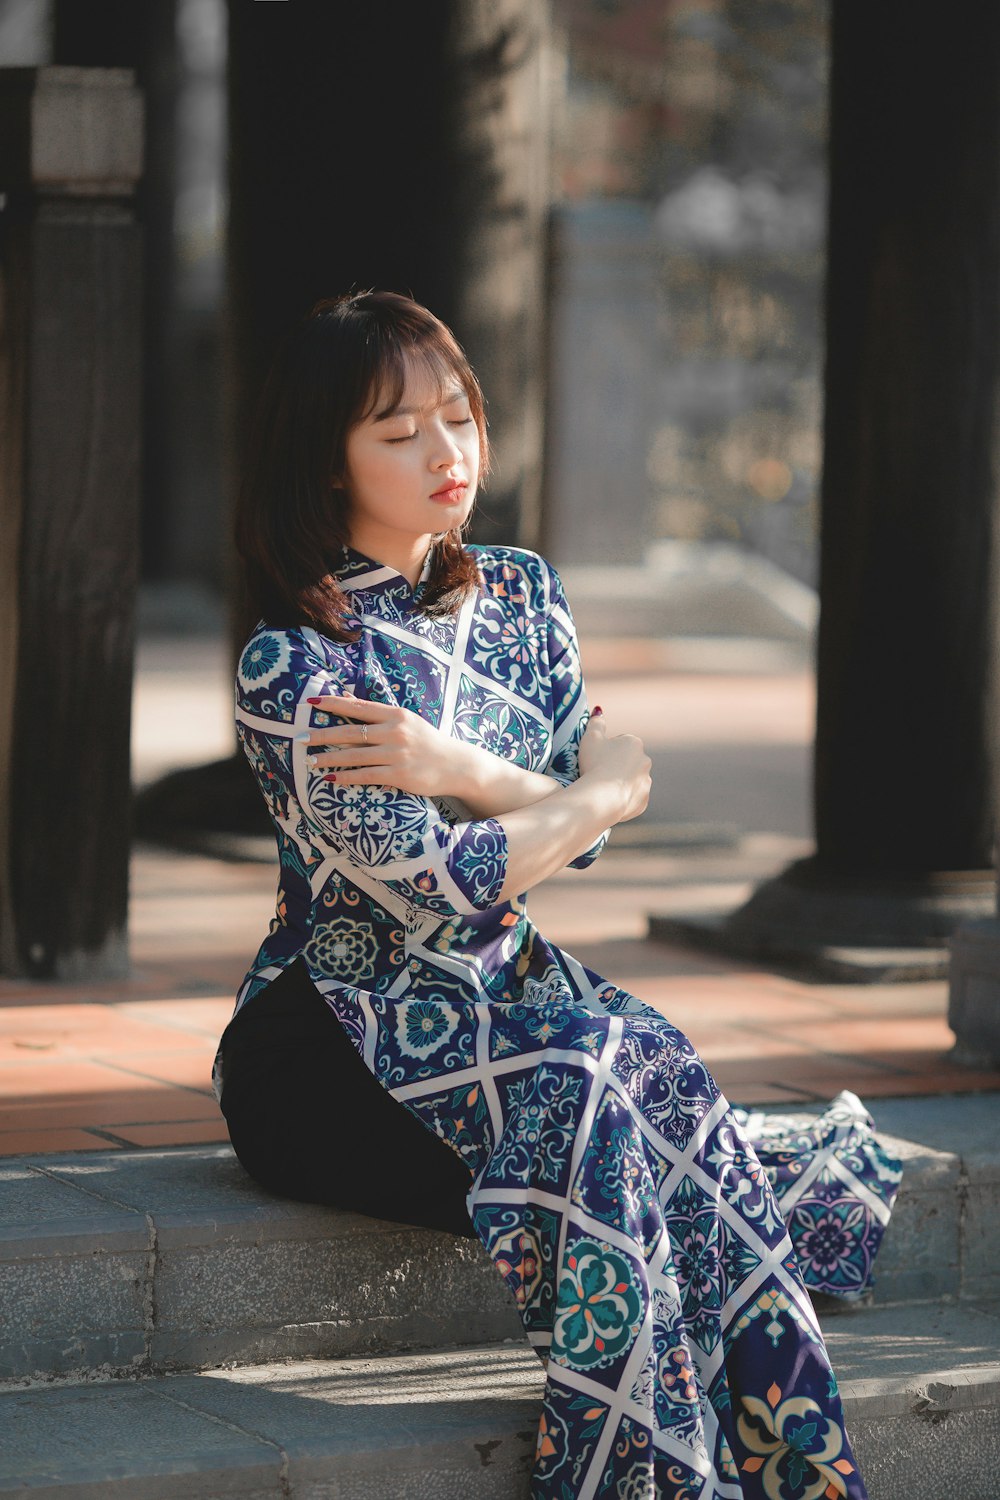 woman in blue and white floral dress sitting on the ground